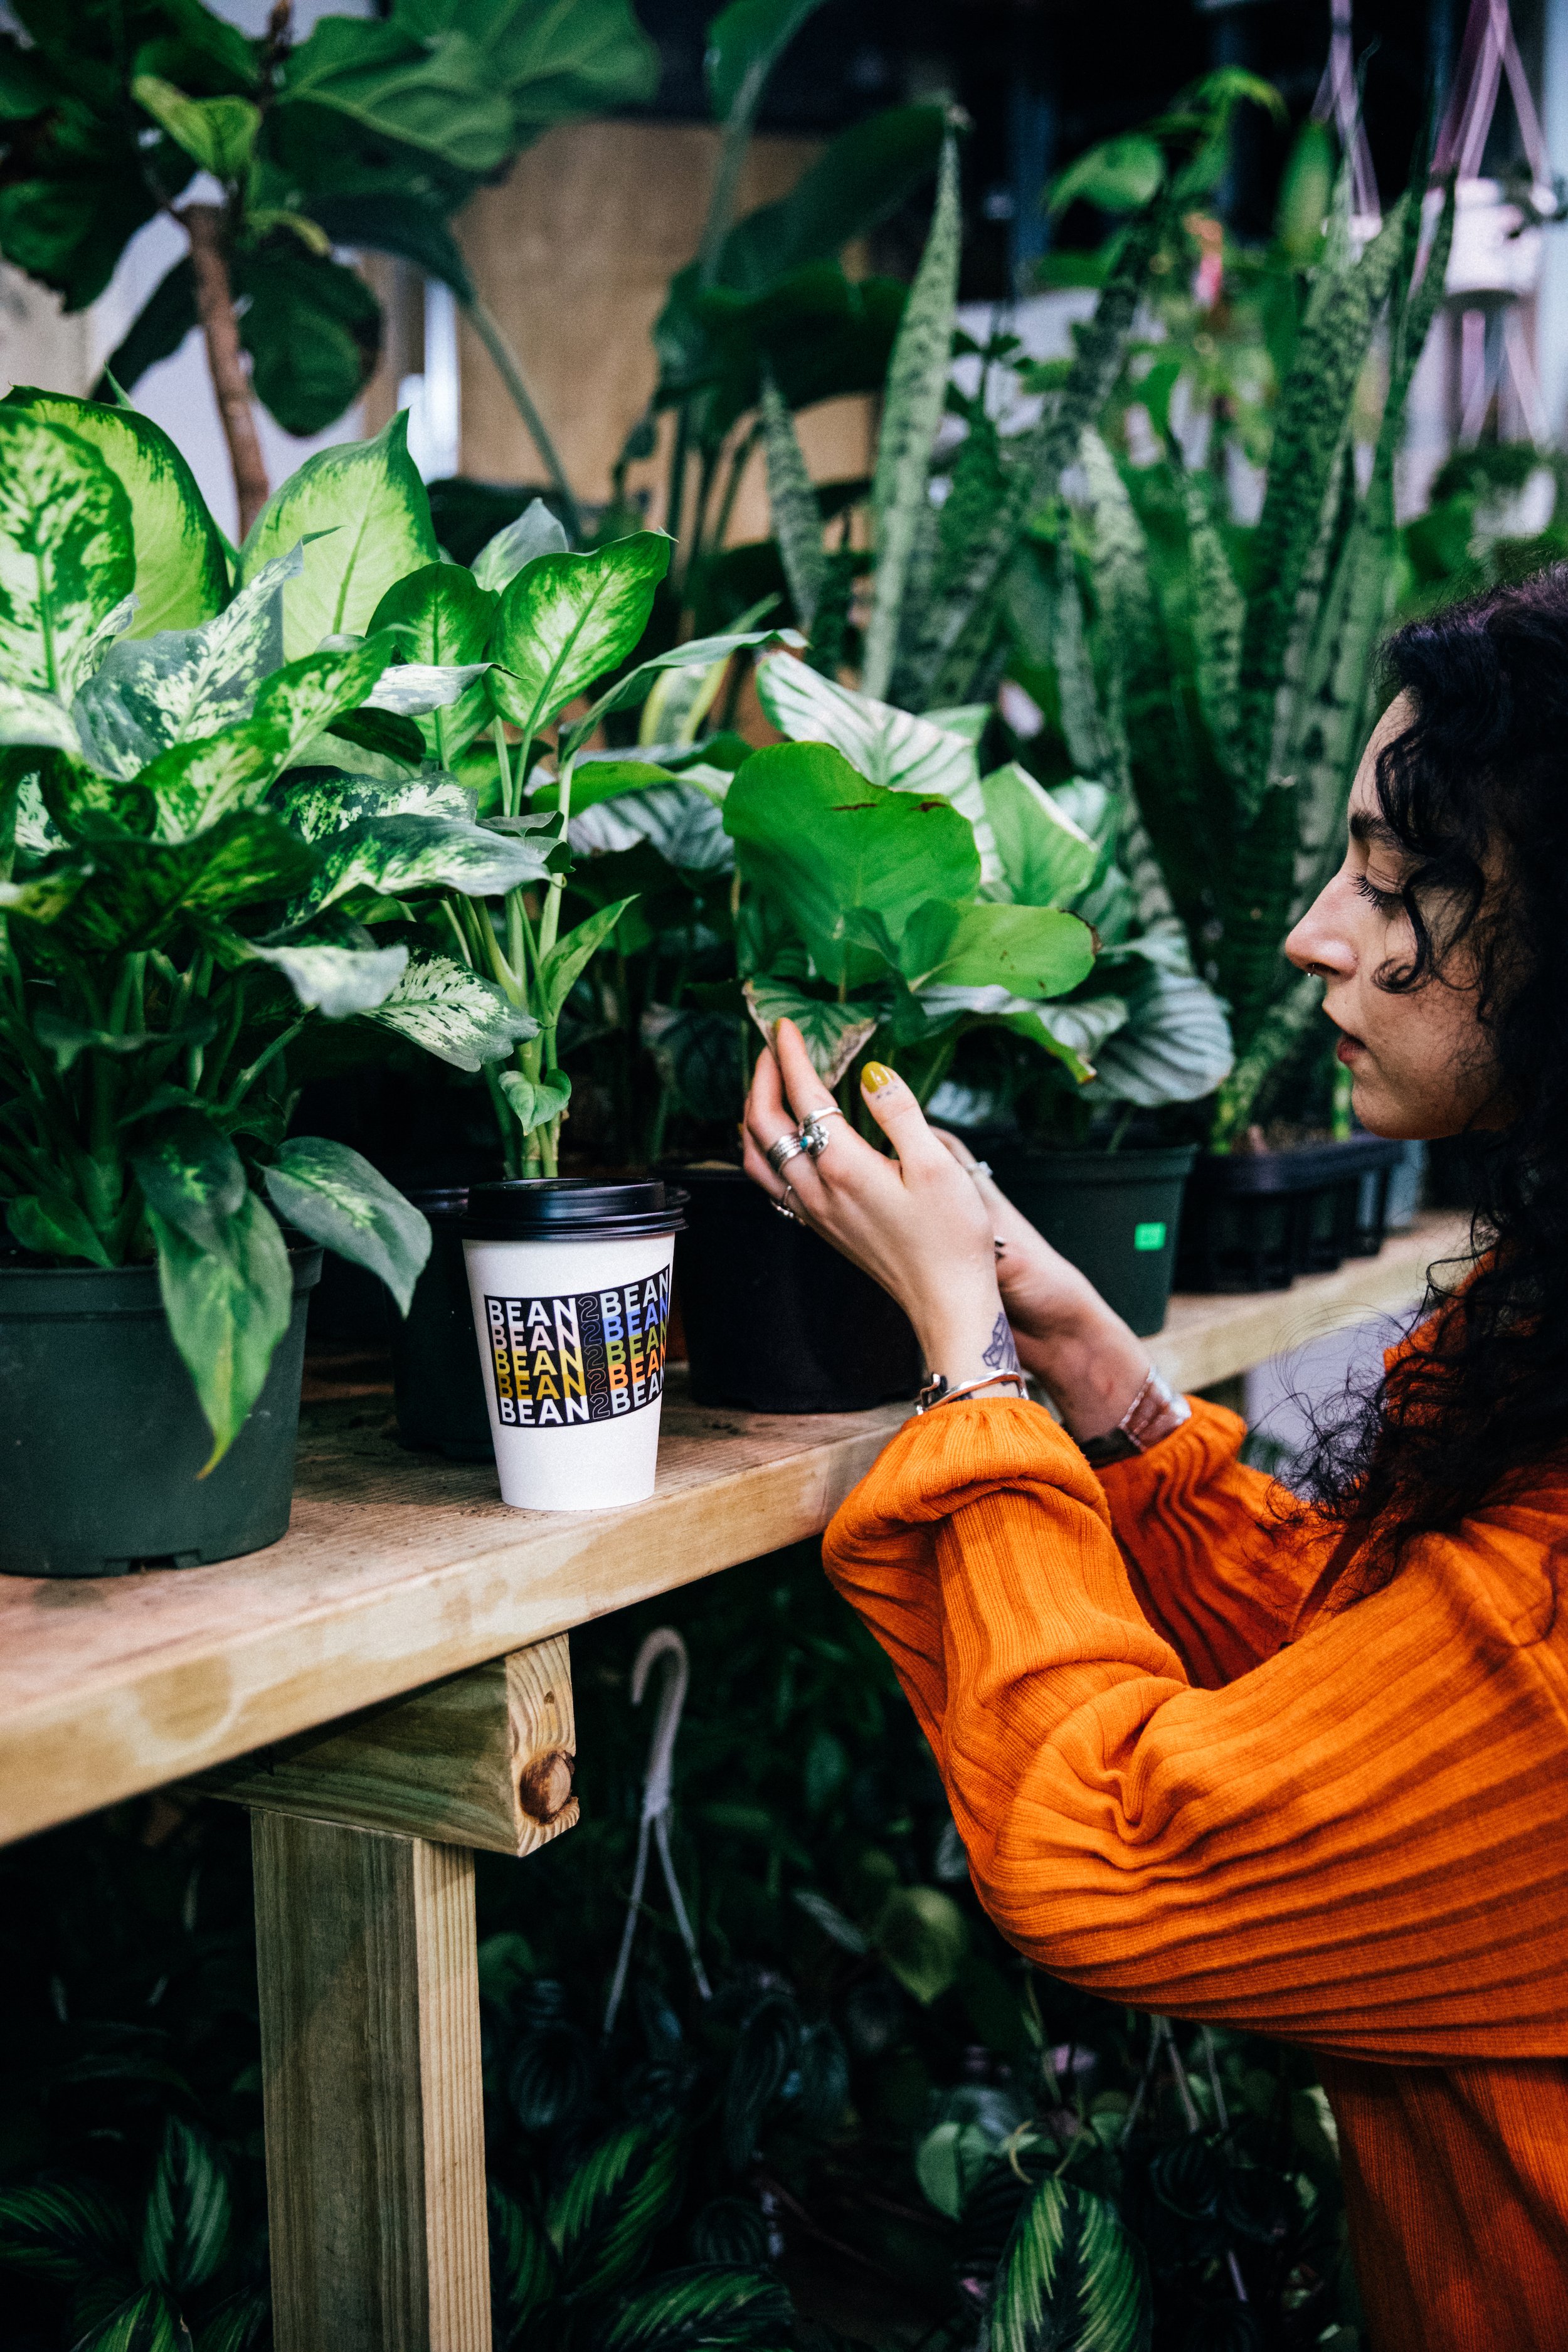 Admiring Plants with Bean2Bean Coffee, Photo by Corey Jermaine